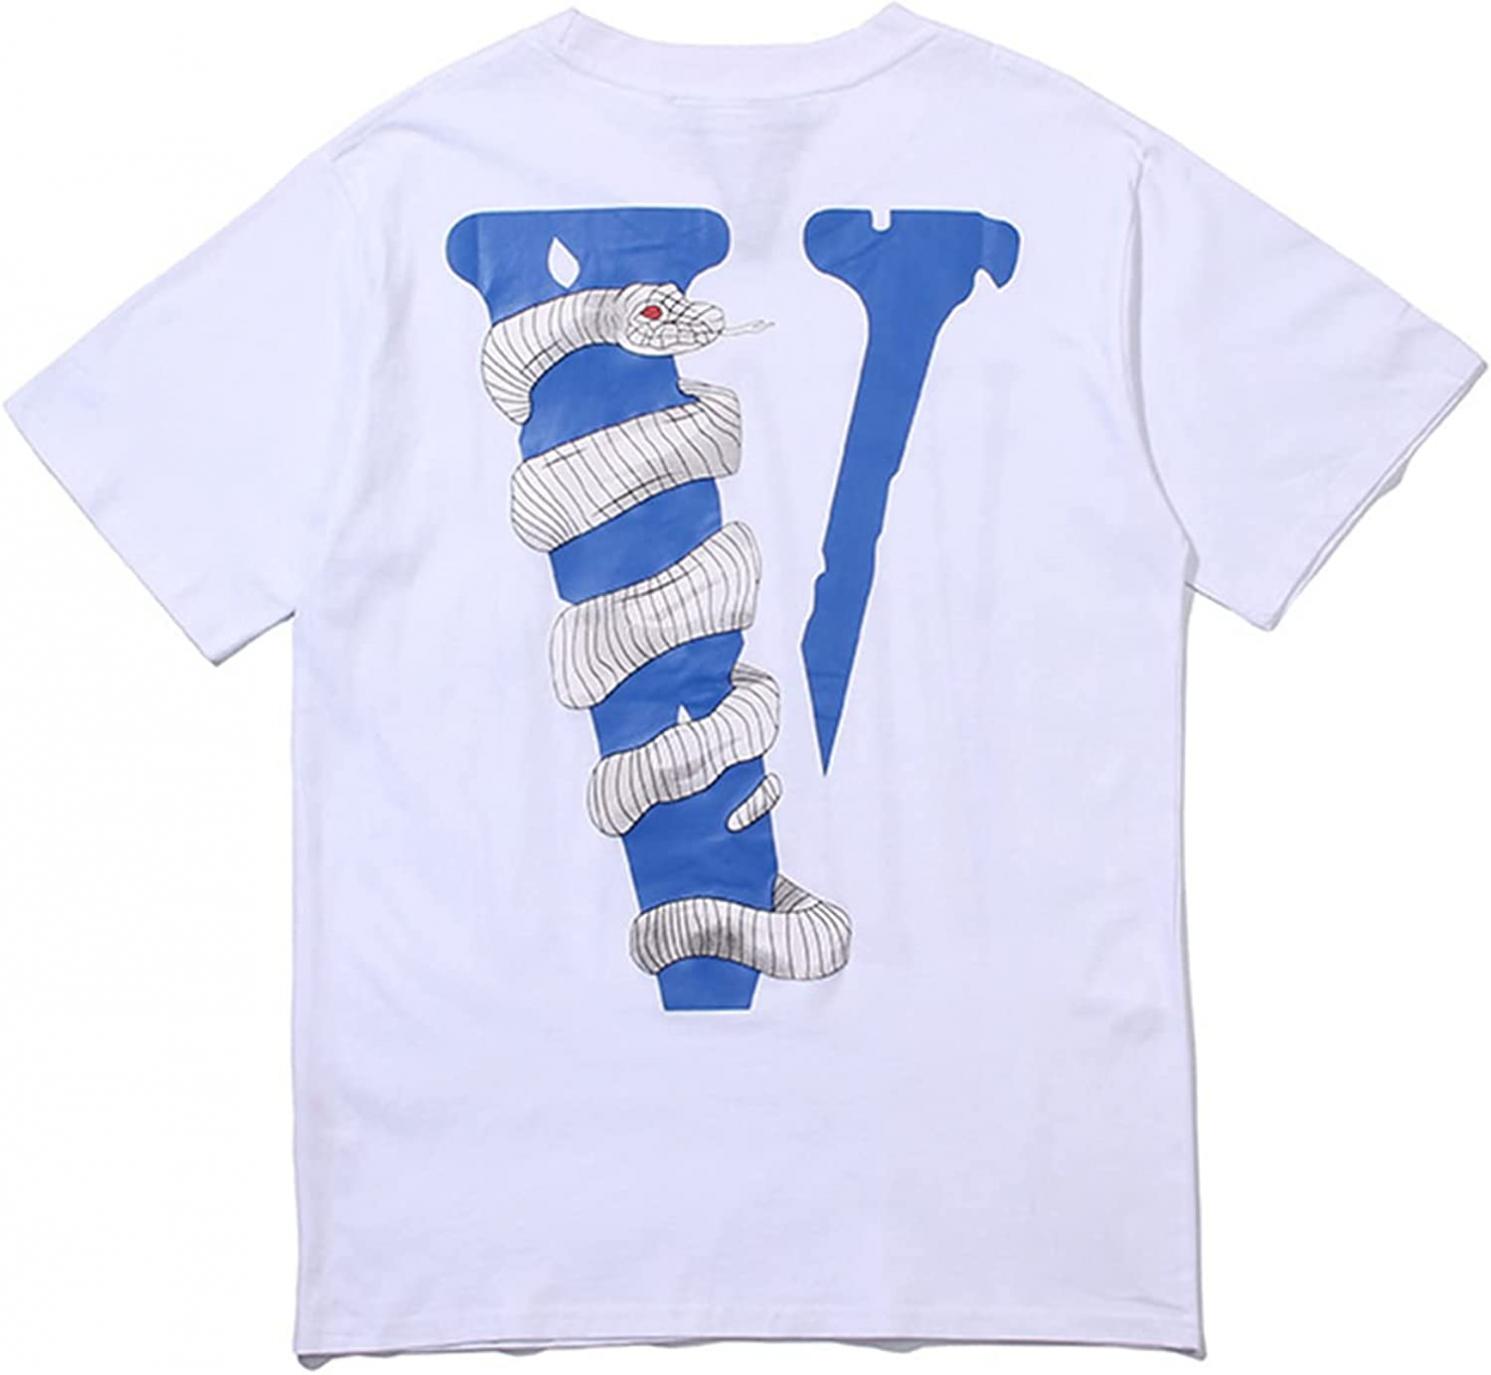 xjzx Big V Letter Shirts Men's Graphic Print T- Shirt Hip Hop Short Sleeve Tee for Youth Teen